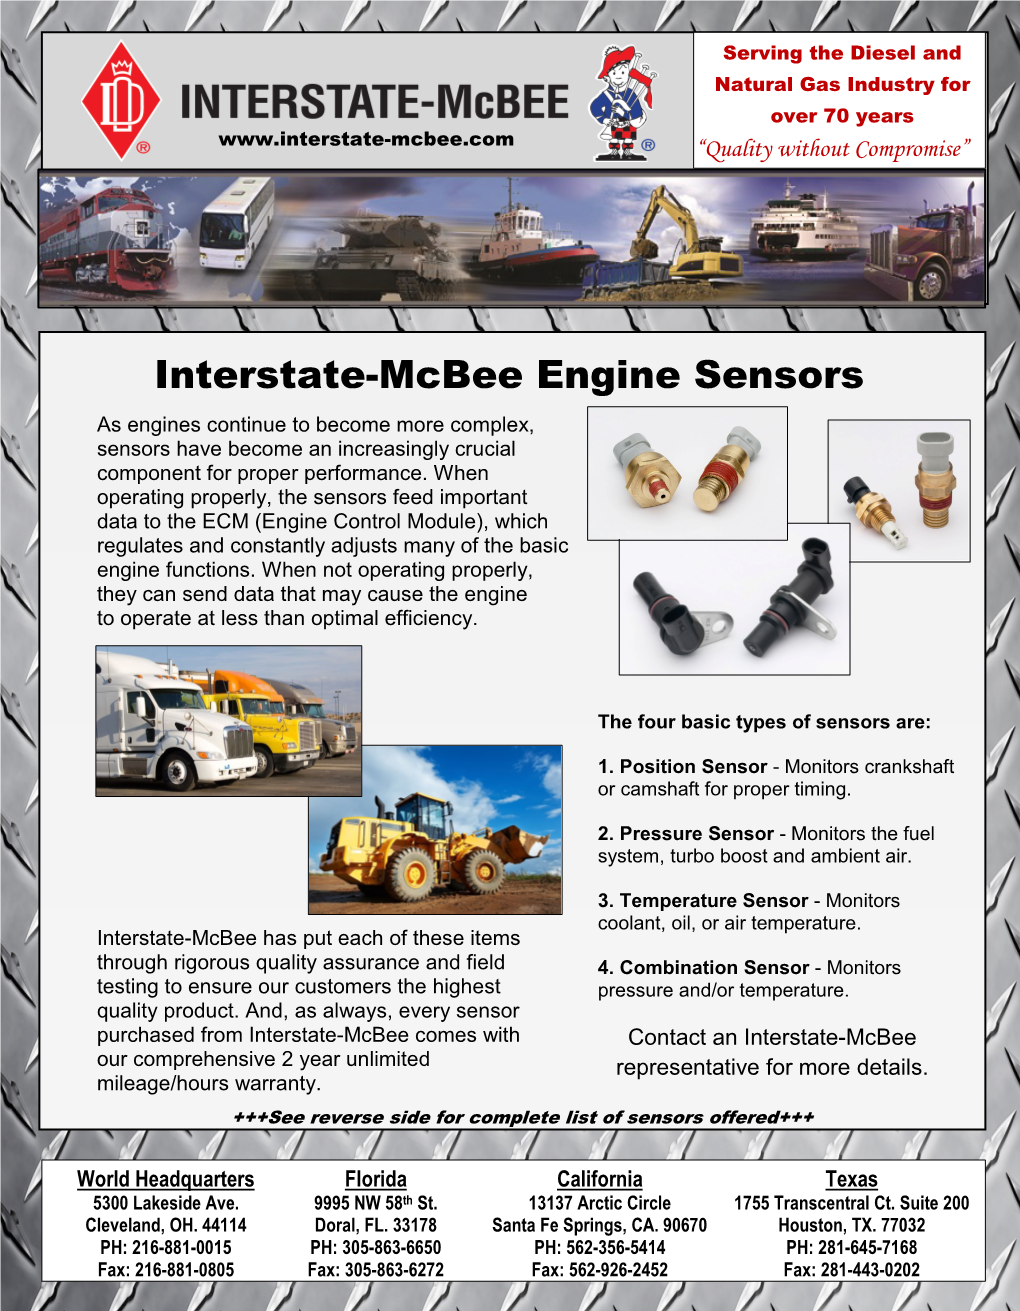 Interstate-Mcbee Engine Sensors As Engines Continue to Become More Complex, Sensors Have Become an Increasingly Crucial Component for Proper Performance